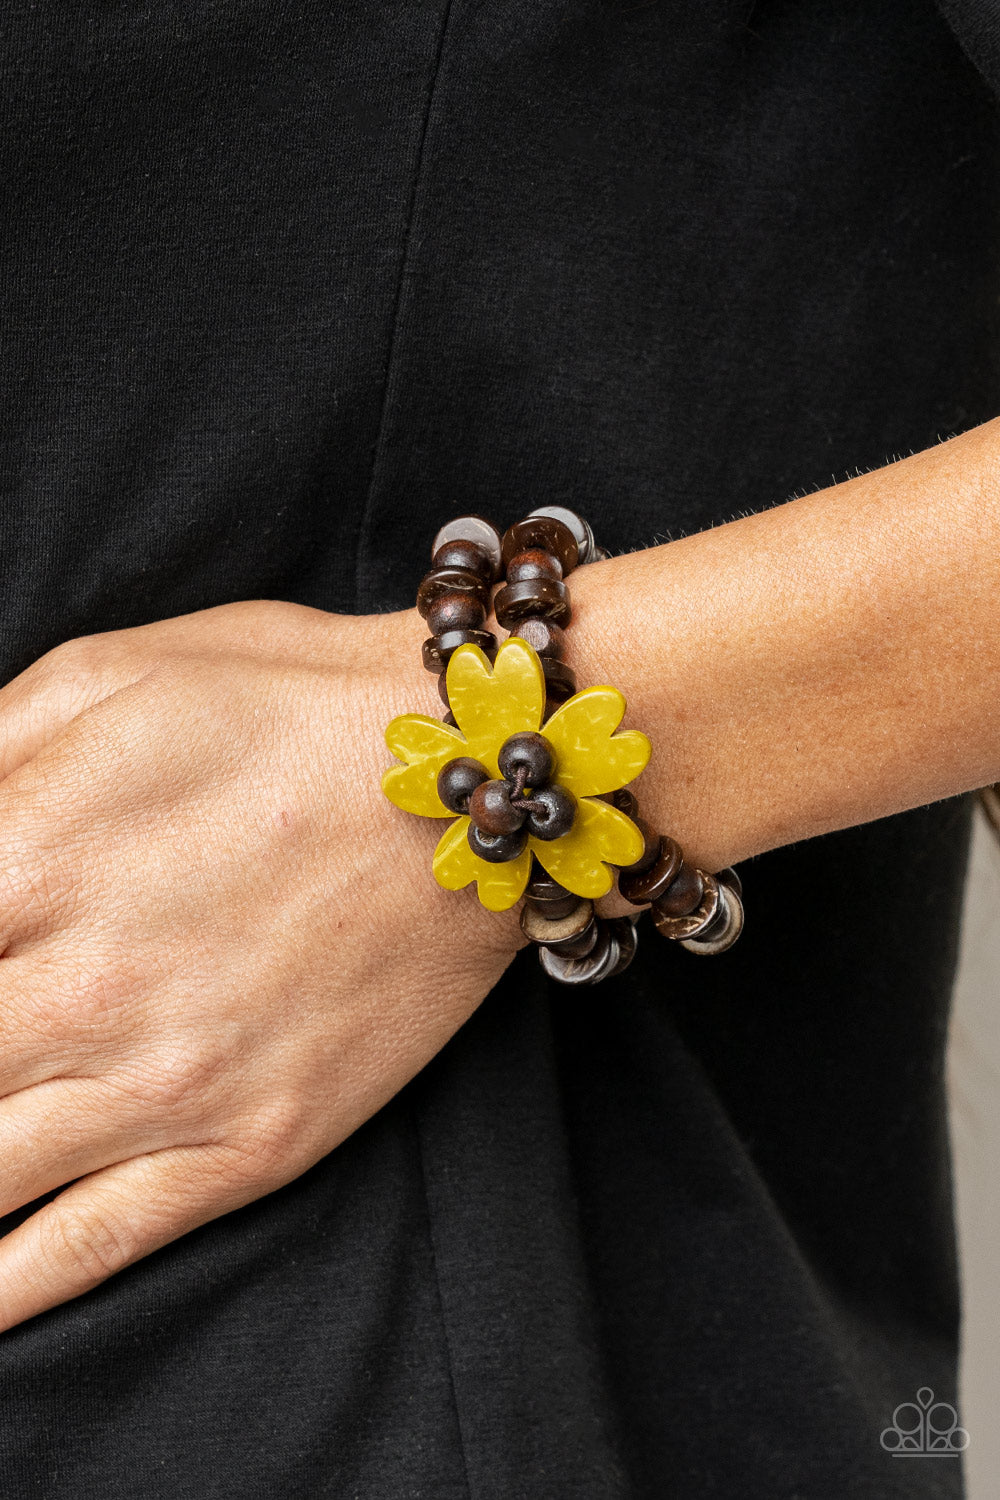 Paparazzi Tropical Flavor - Yellow Wood Bracelets featuring heart-shaped petals, a sunny yellow wooden flower sits atop double strands of wooden beads threaded along stretchy bands for a tropical flair atop the wrist.  Sold as one individual bracelet.